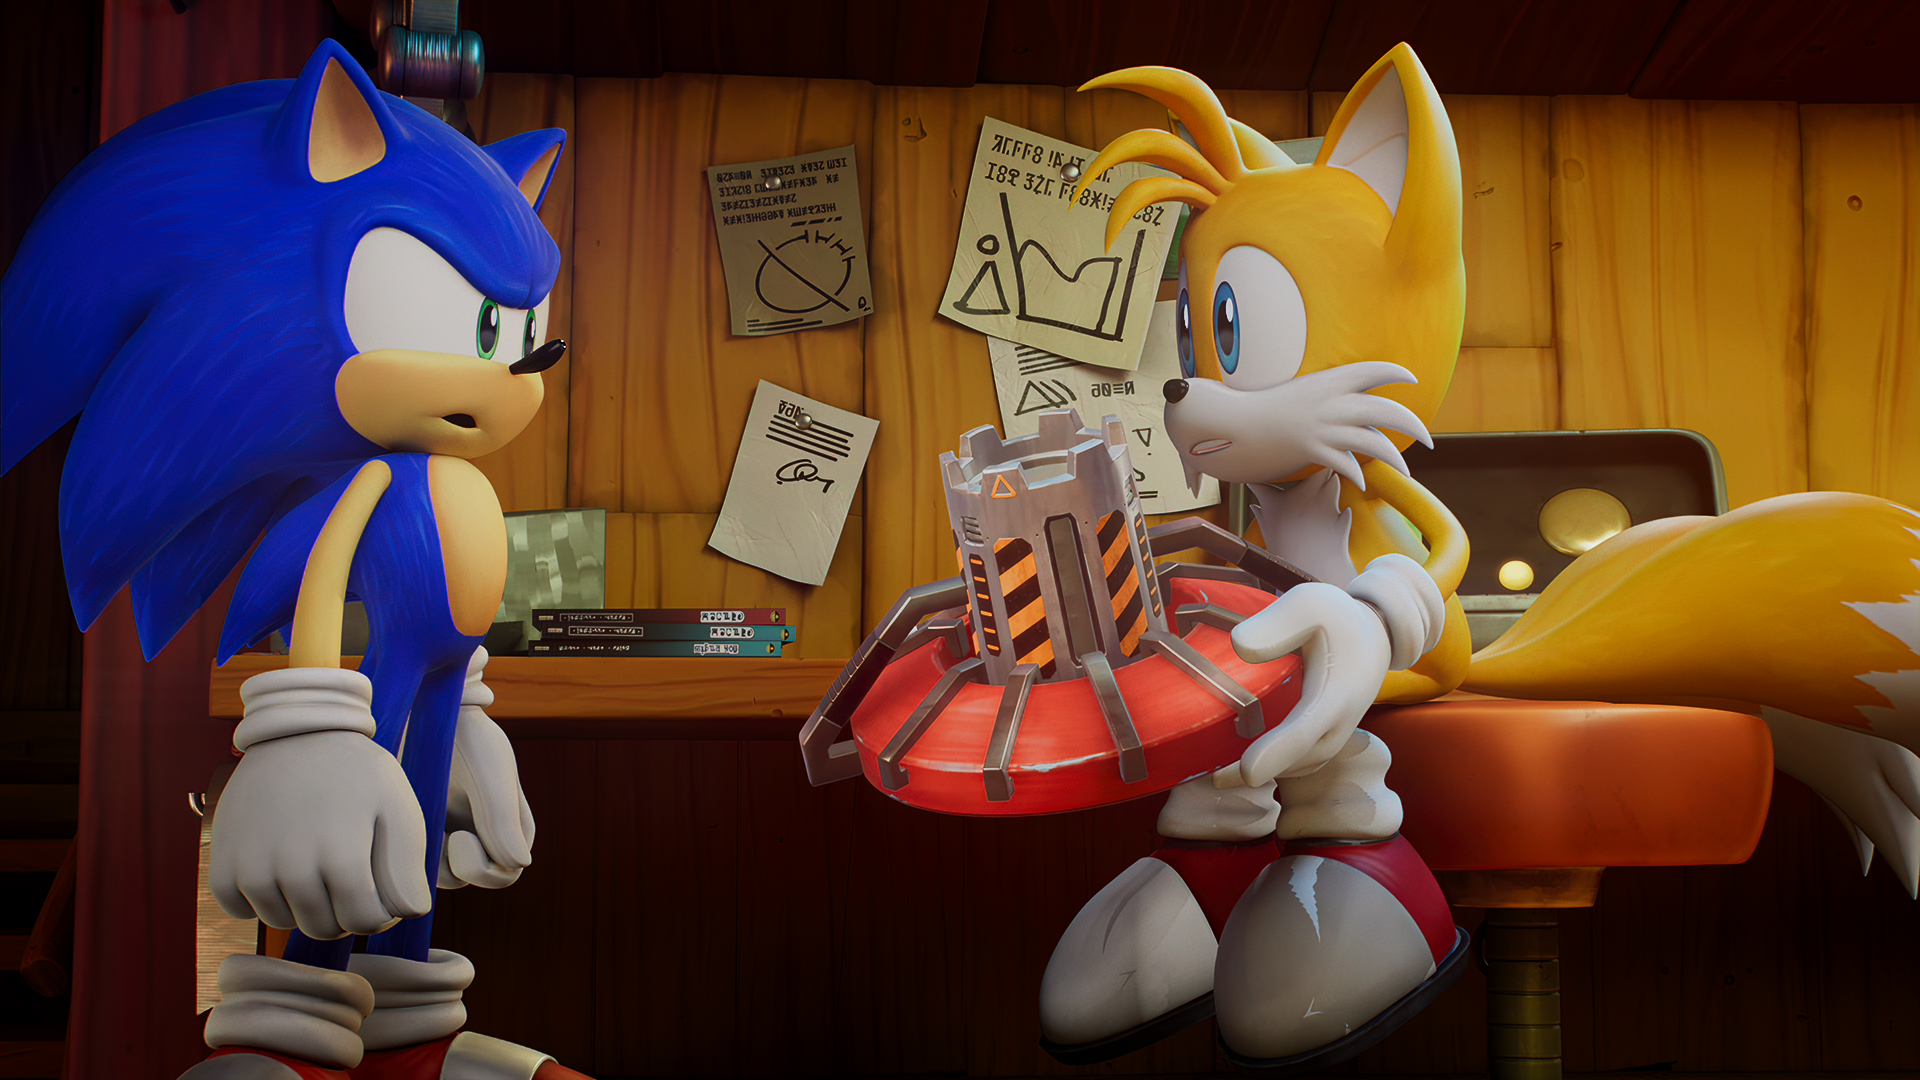 Sonic Prime - Tails Nine #10 by SonicBoomGirl23 on DeviantArt